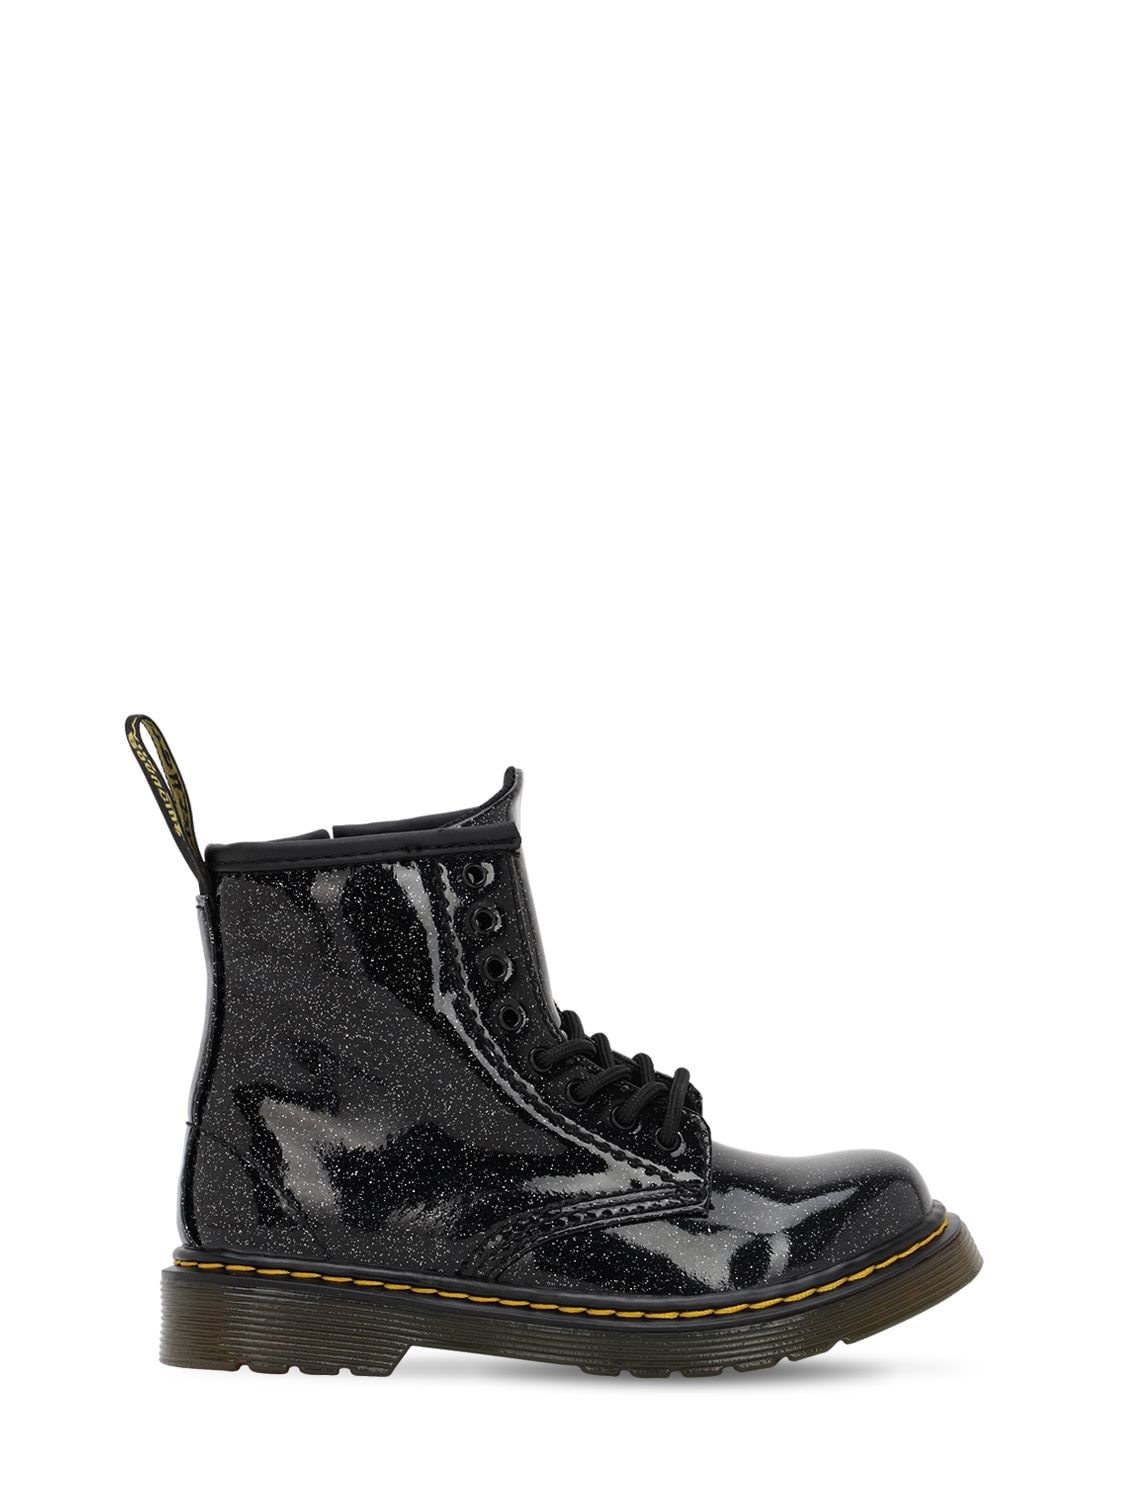 Dr. Martens' Kids' Glittered Faux Leather Boots In Black